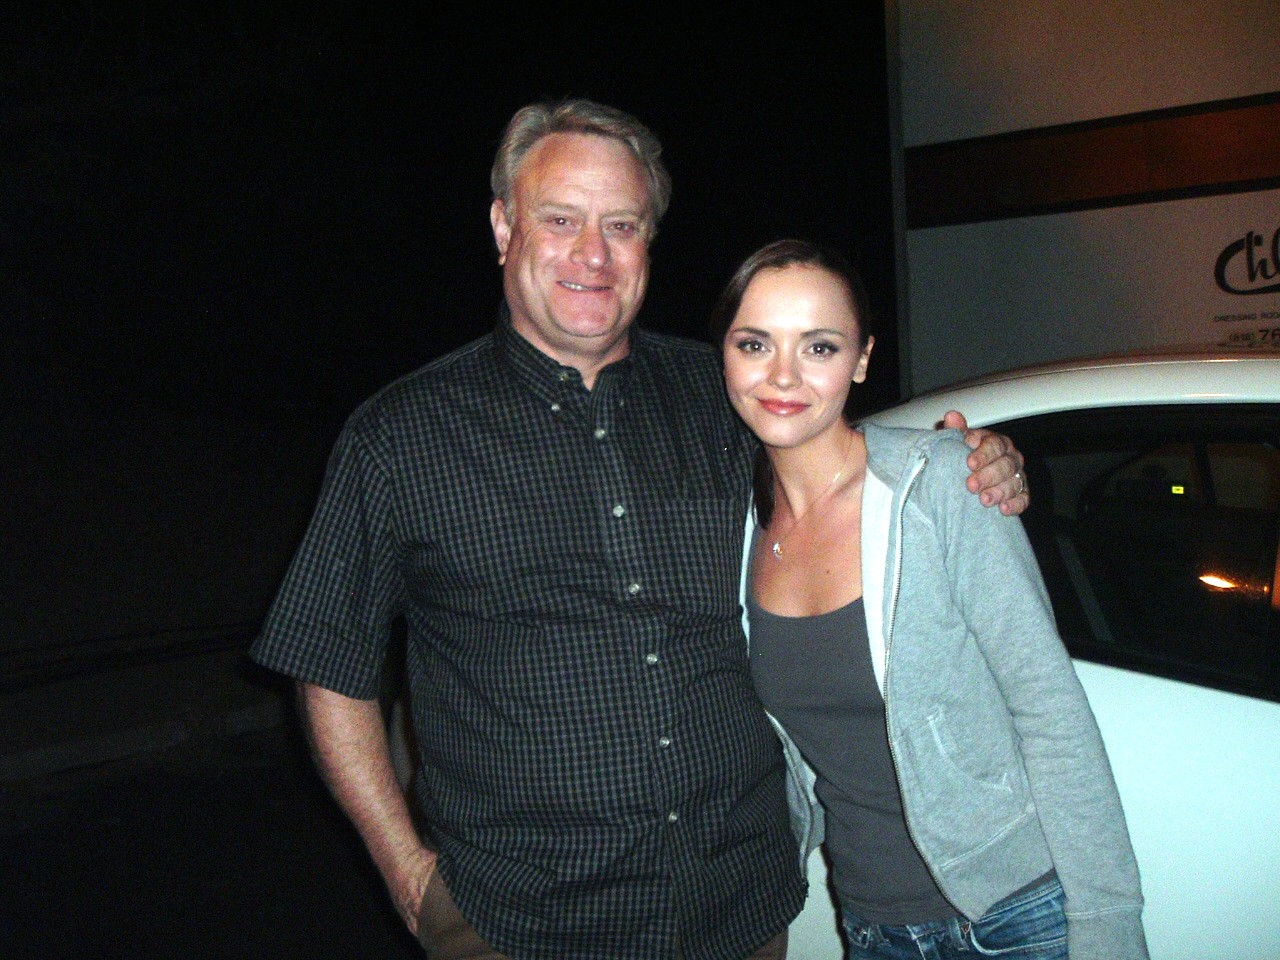 Kevin Brief with Christina Ricci on location for BORN TO BE A STAR.